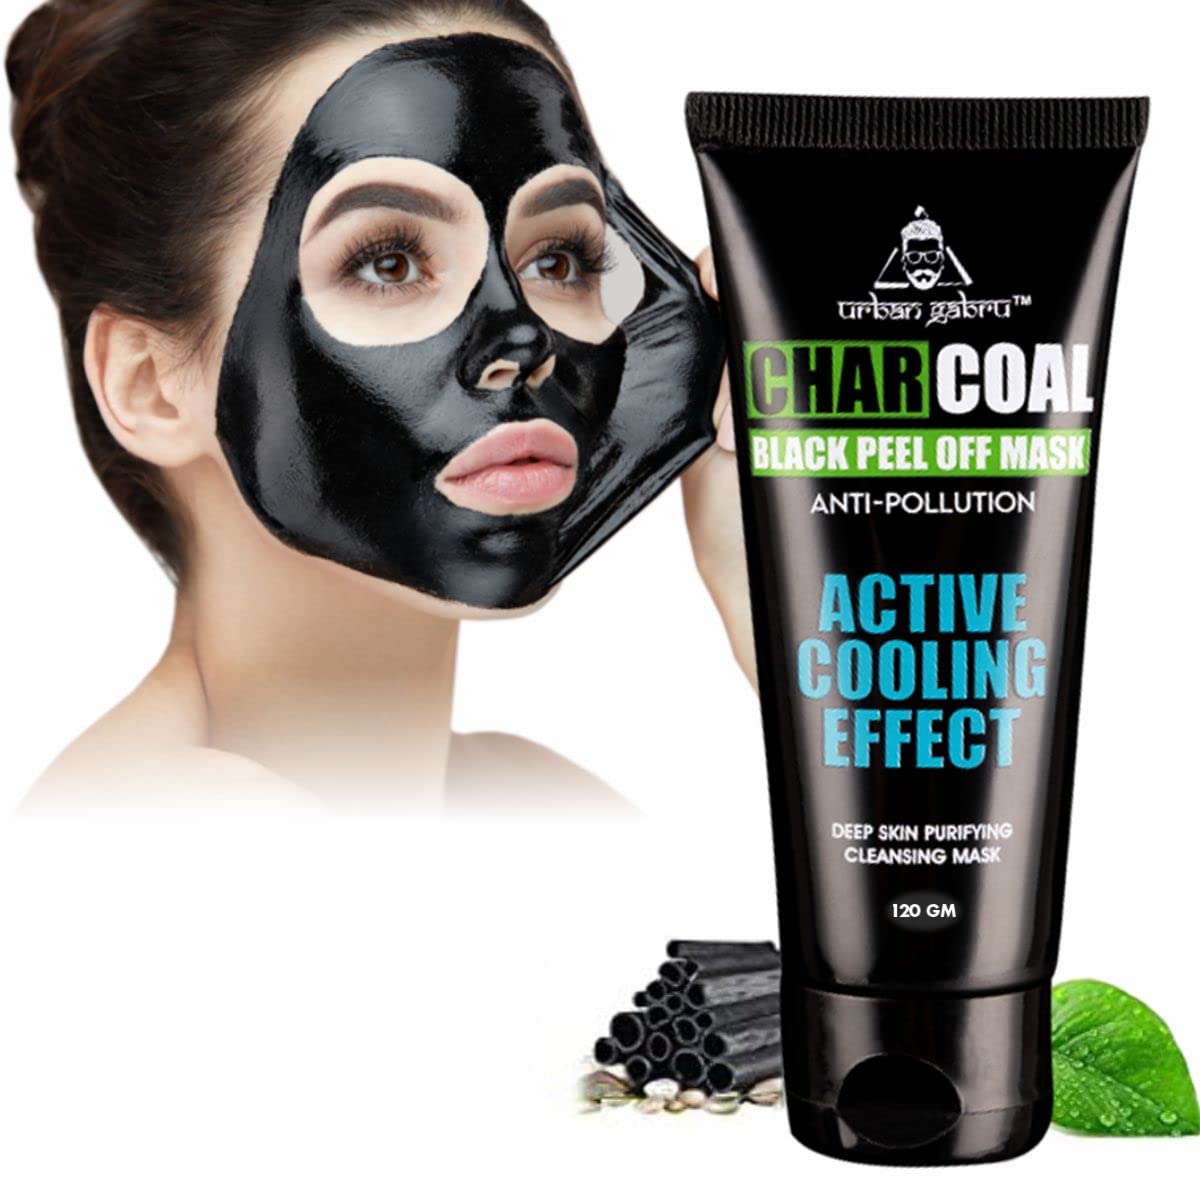 UrbanGabru Charcoal Peel Off Mask for Men & Women | Removes Blackheads and Whiteheads | Active Cooling Effect | Deep Skin Purifying Cleansing (120 g)